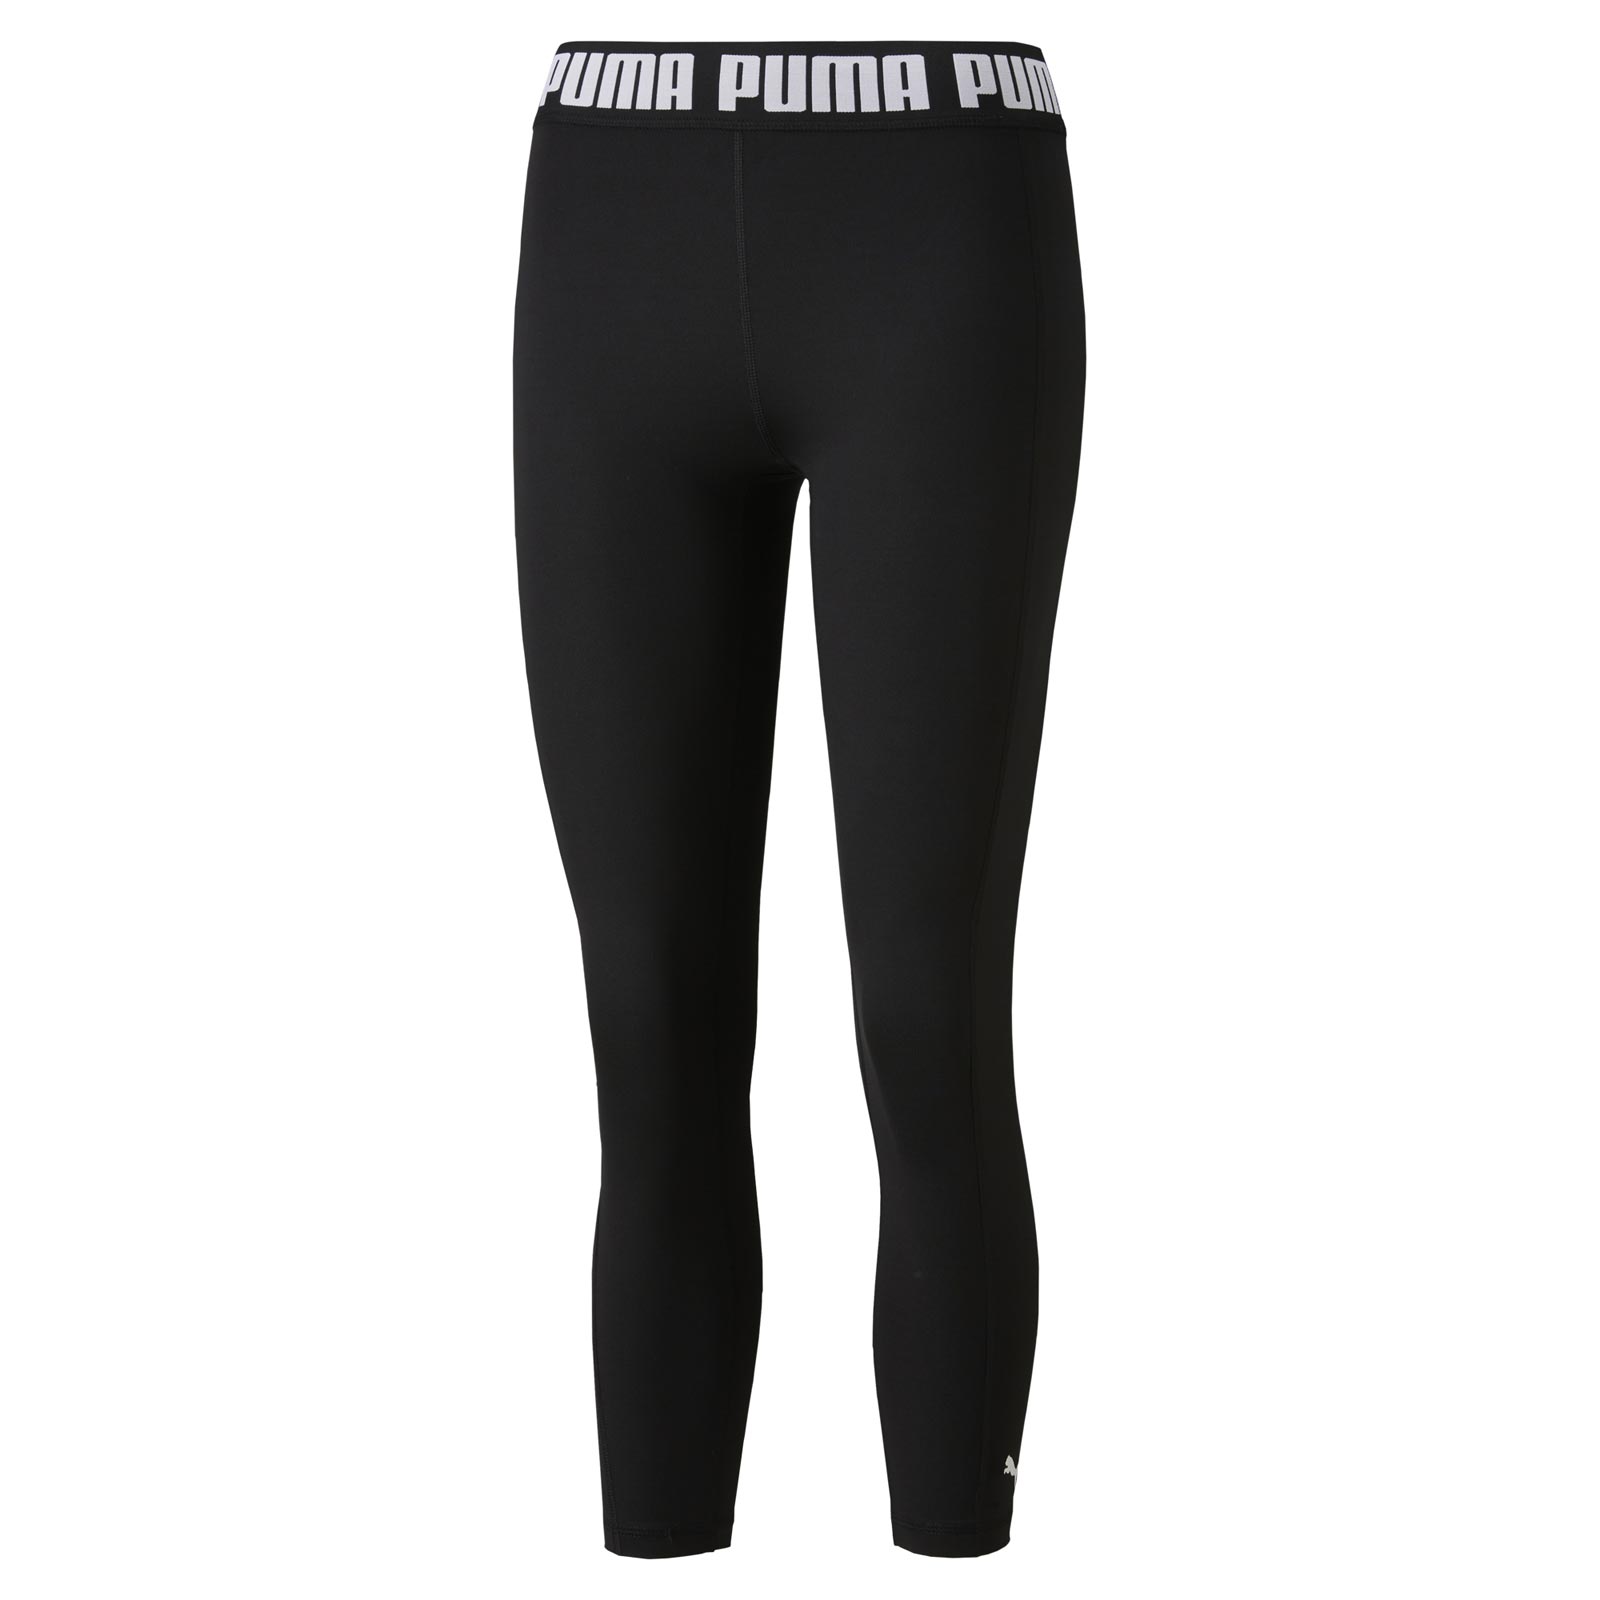 PUMA STRONG HIGH WAISTED WOMEN'S TRAINING TIGHTS